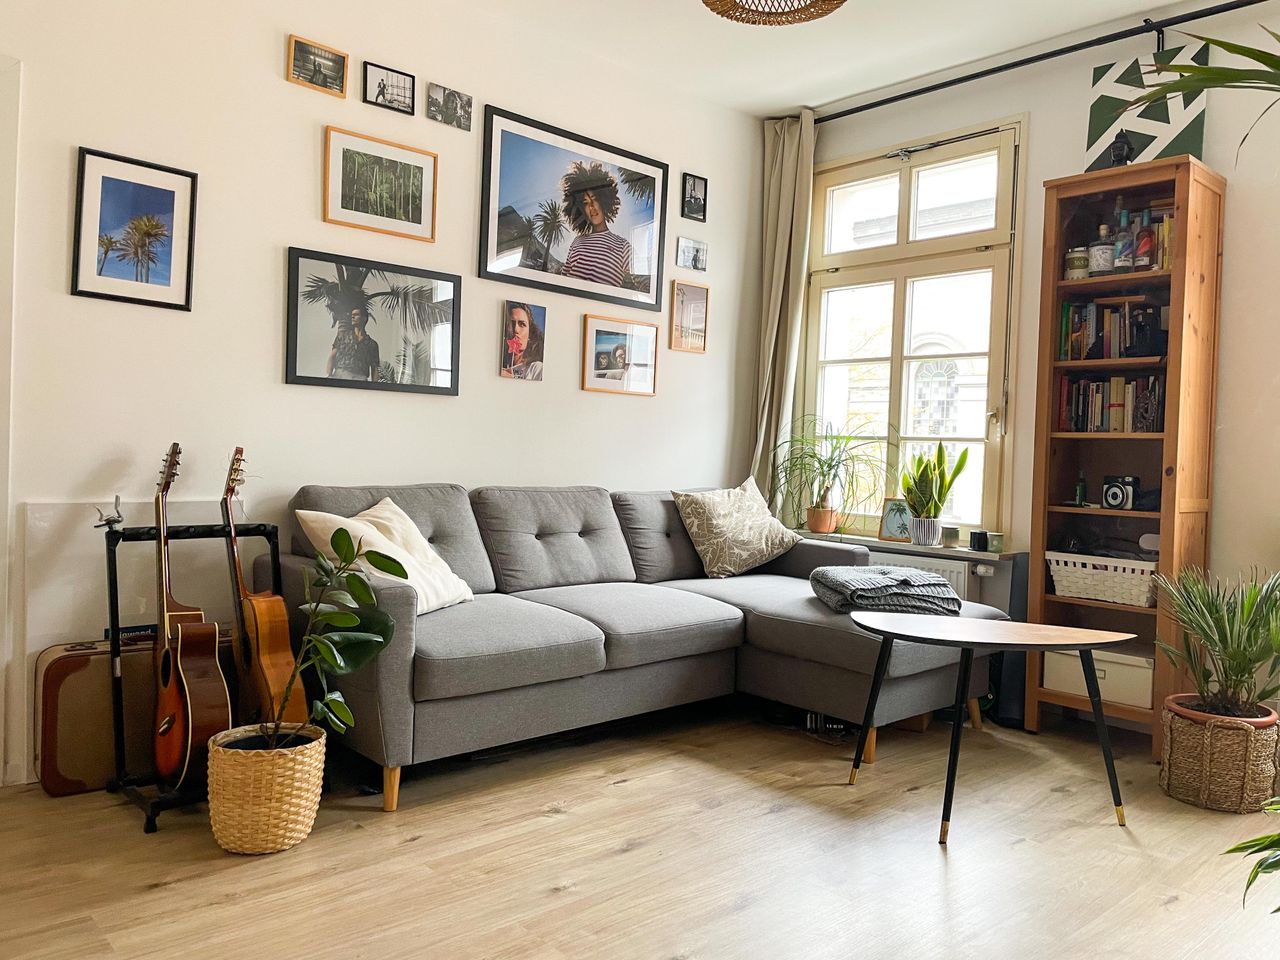 Modern and beautifully furnished flat right in the middle of the old town of Wuppertal